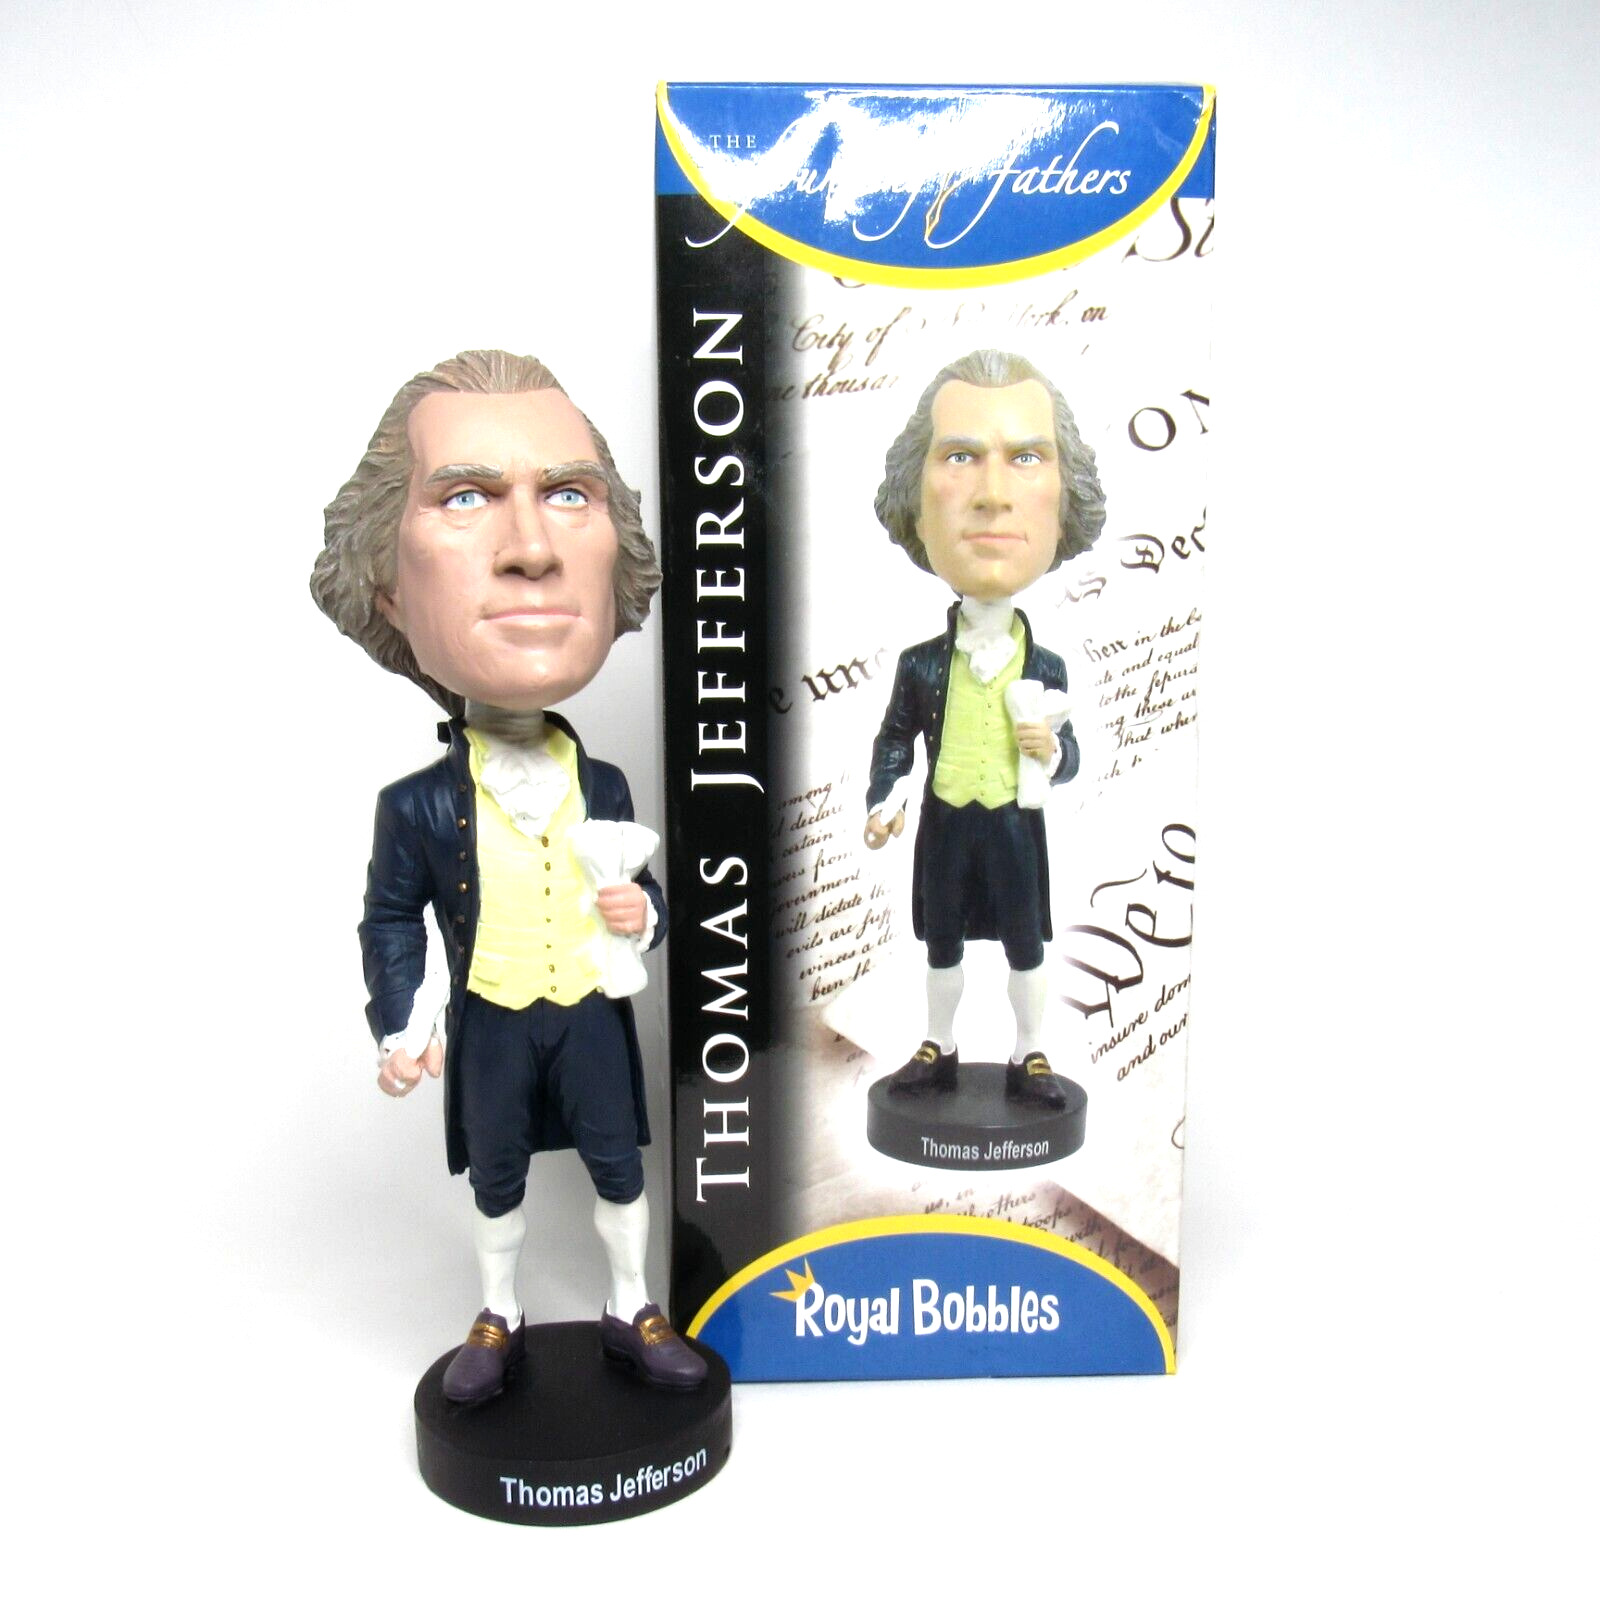 Thomas Jefferson Bobblehead Royal Bobbles Founding Fathers Limited Edition